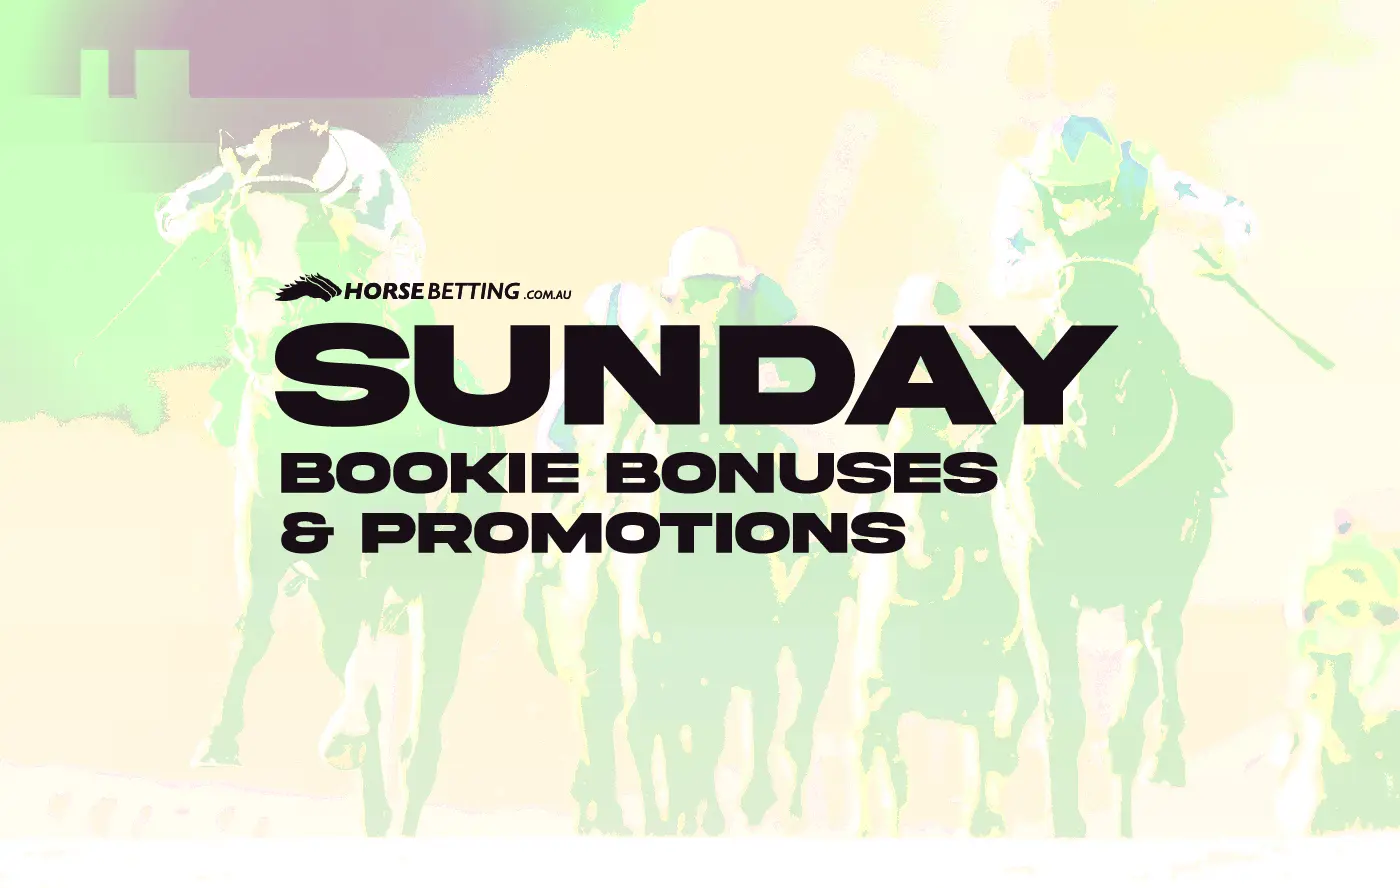 Sunday horse racing promos for April 21